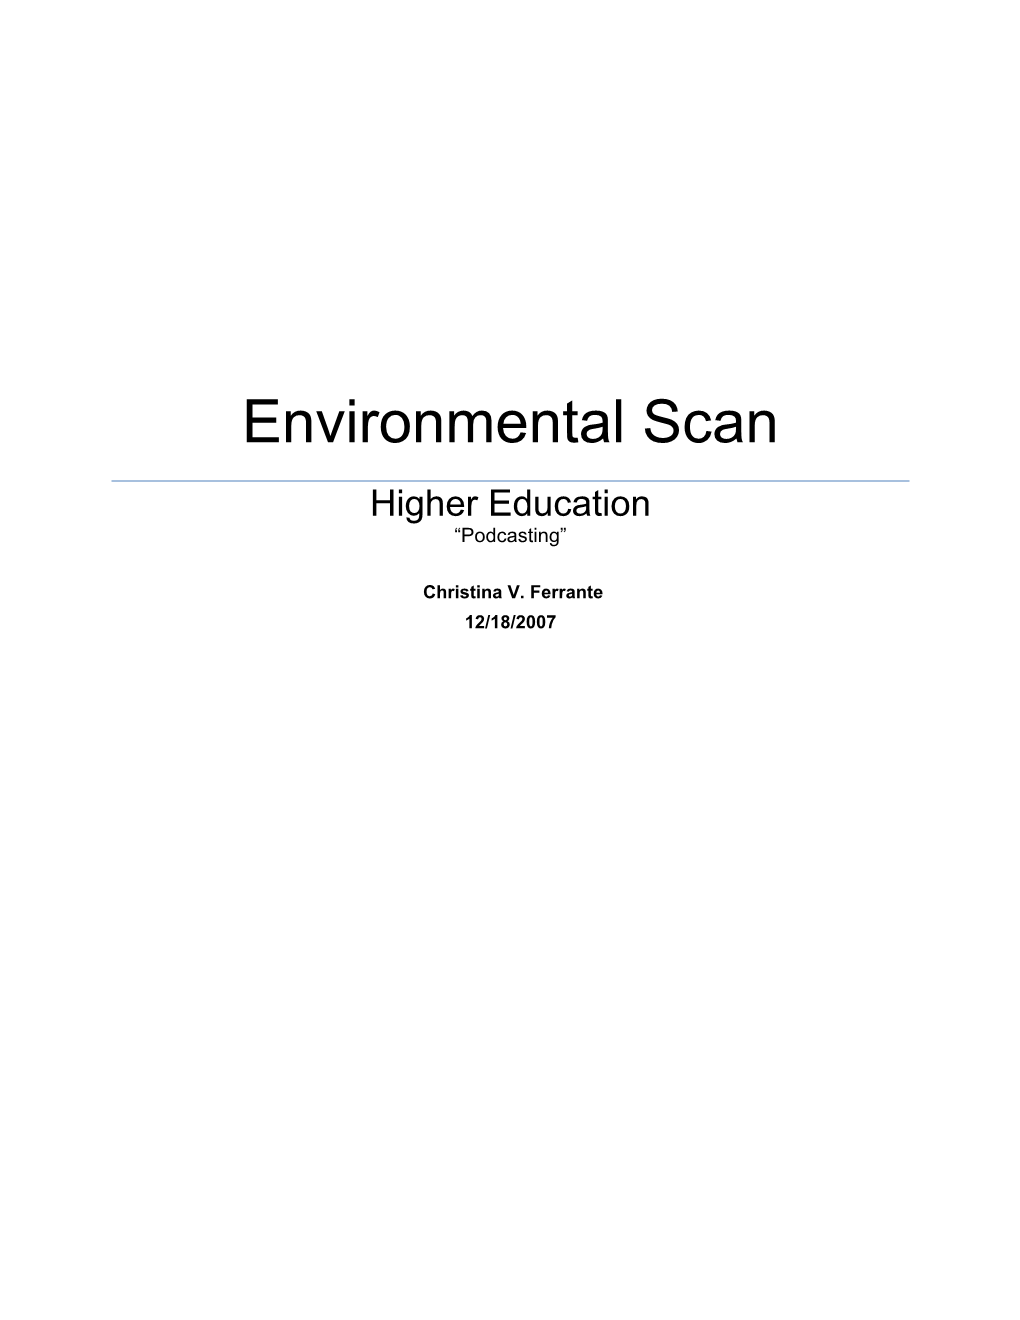 Environmental Scan Higher Education “Podcasting”